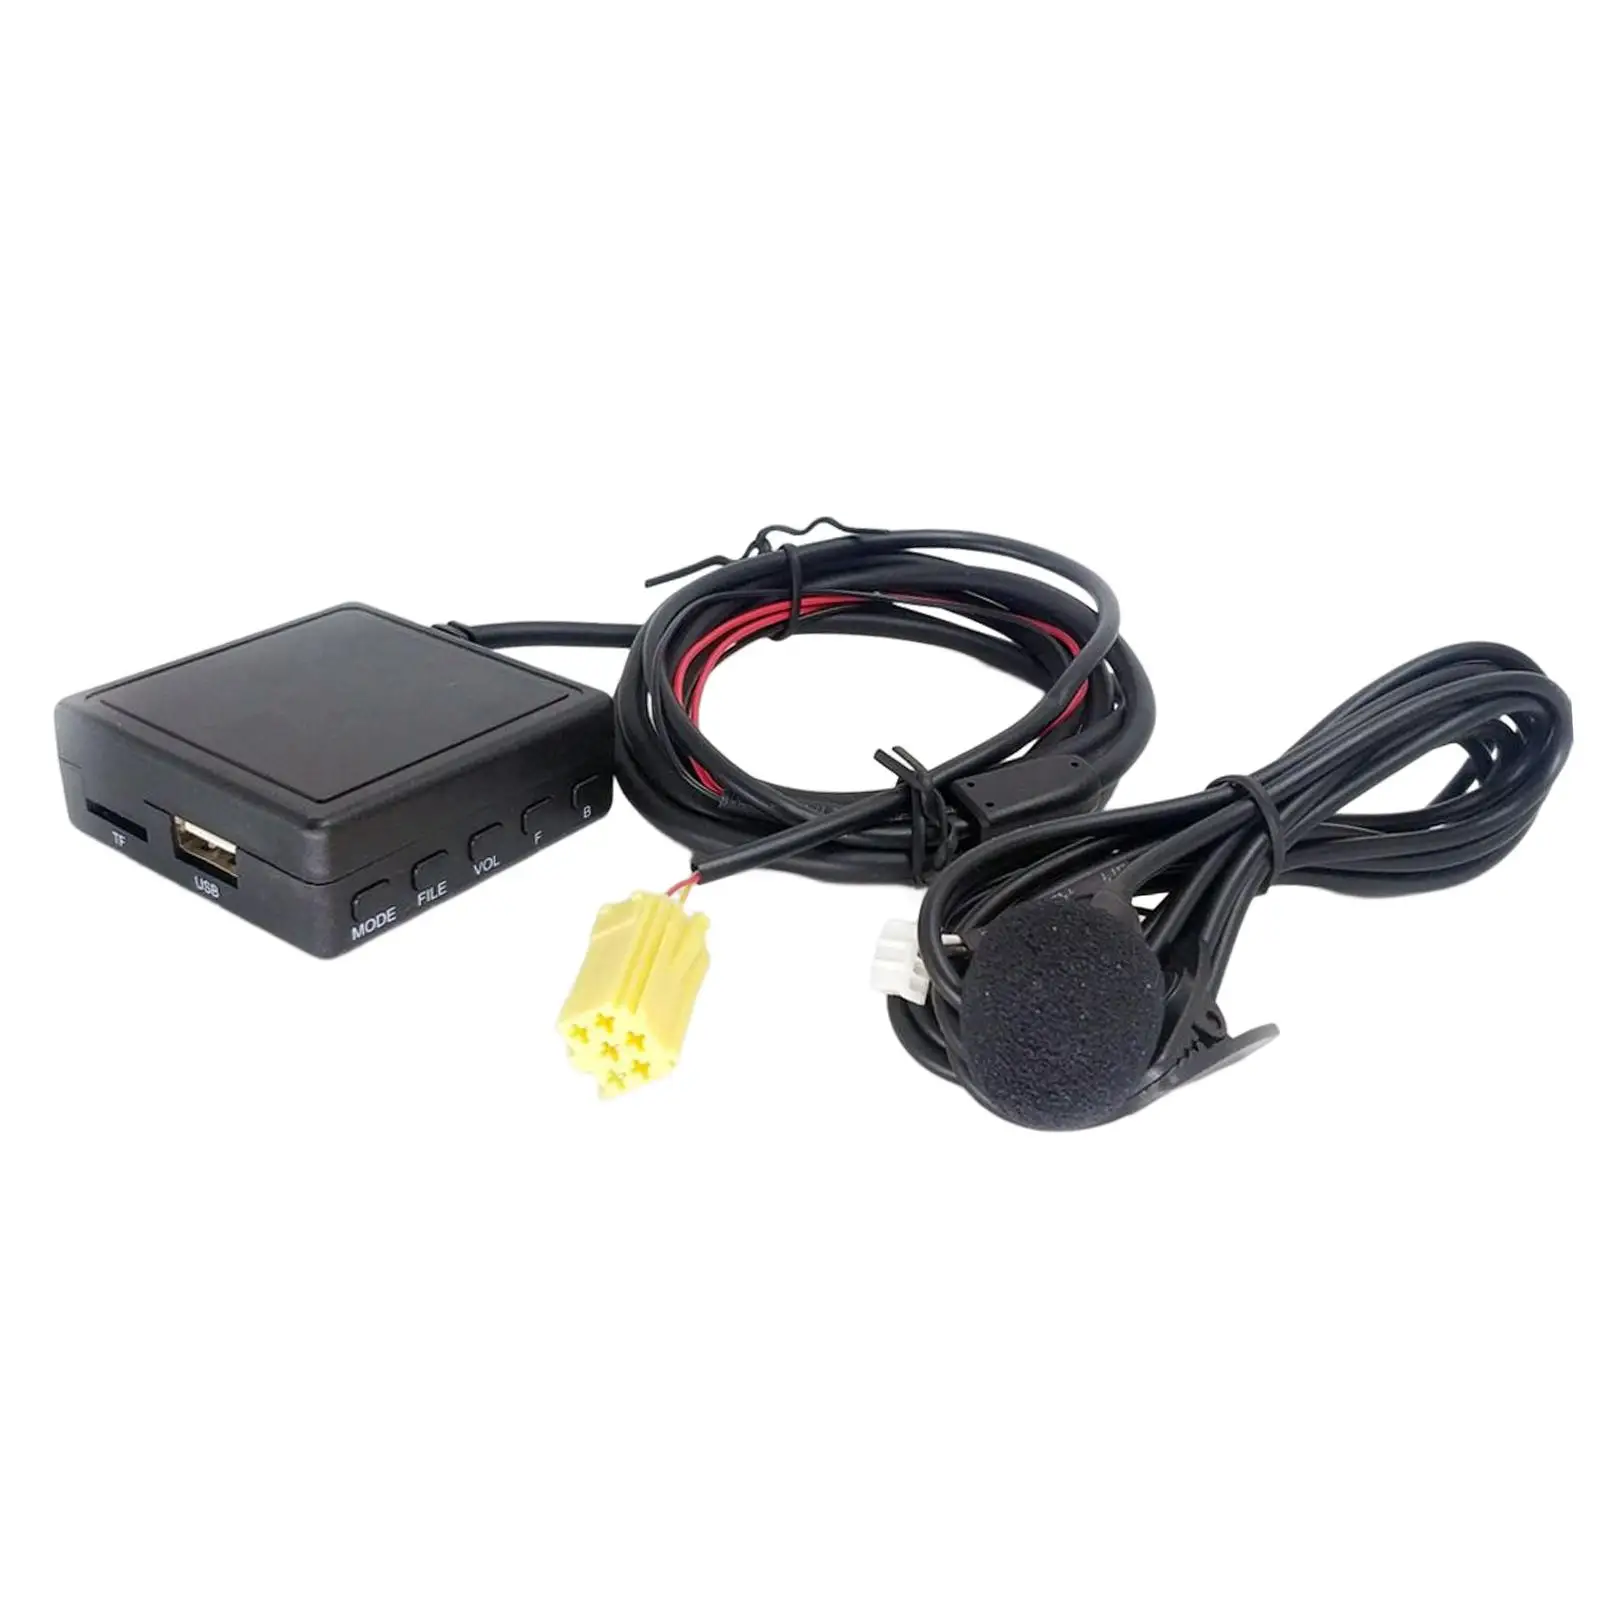 Music Receiver Adapter 12V AUX Input V5.0 Hands Free Microphone for Doblo 2000 - 2014